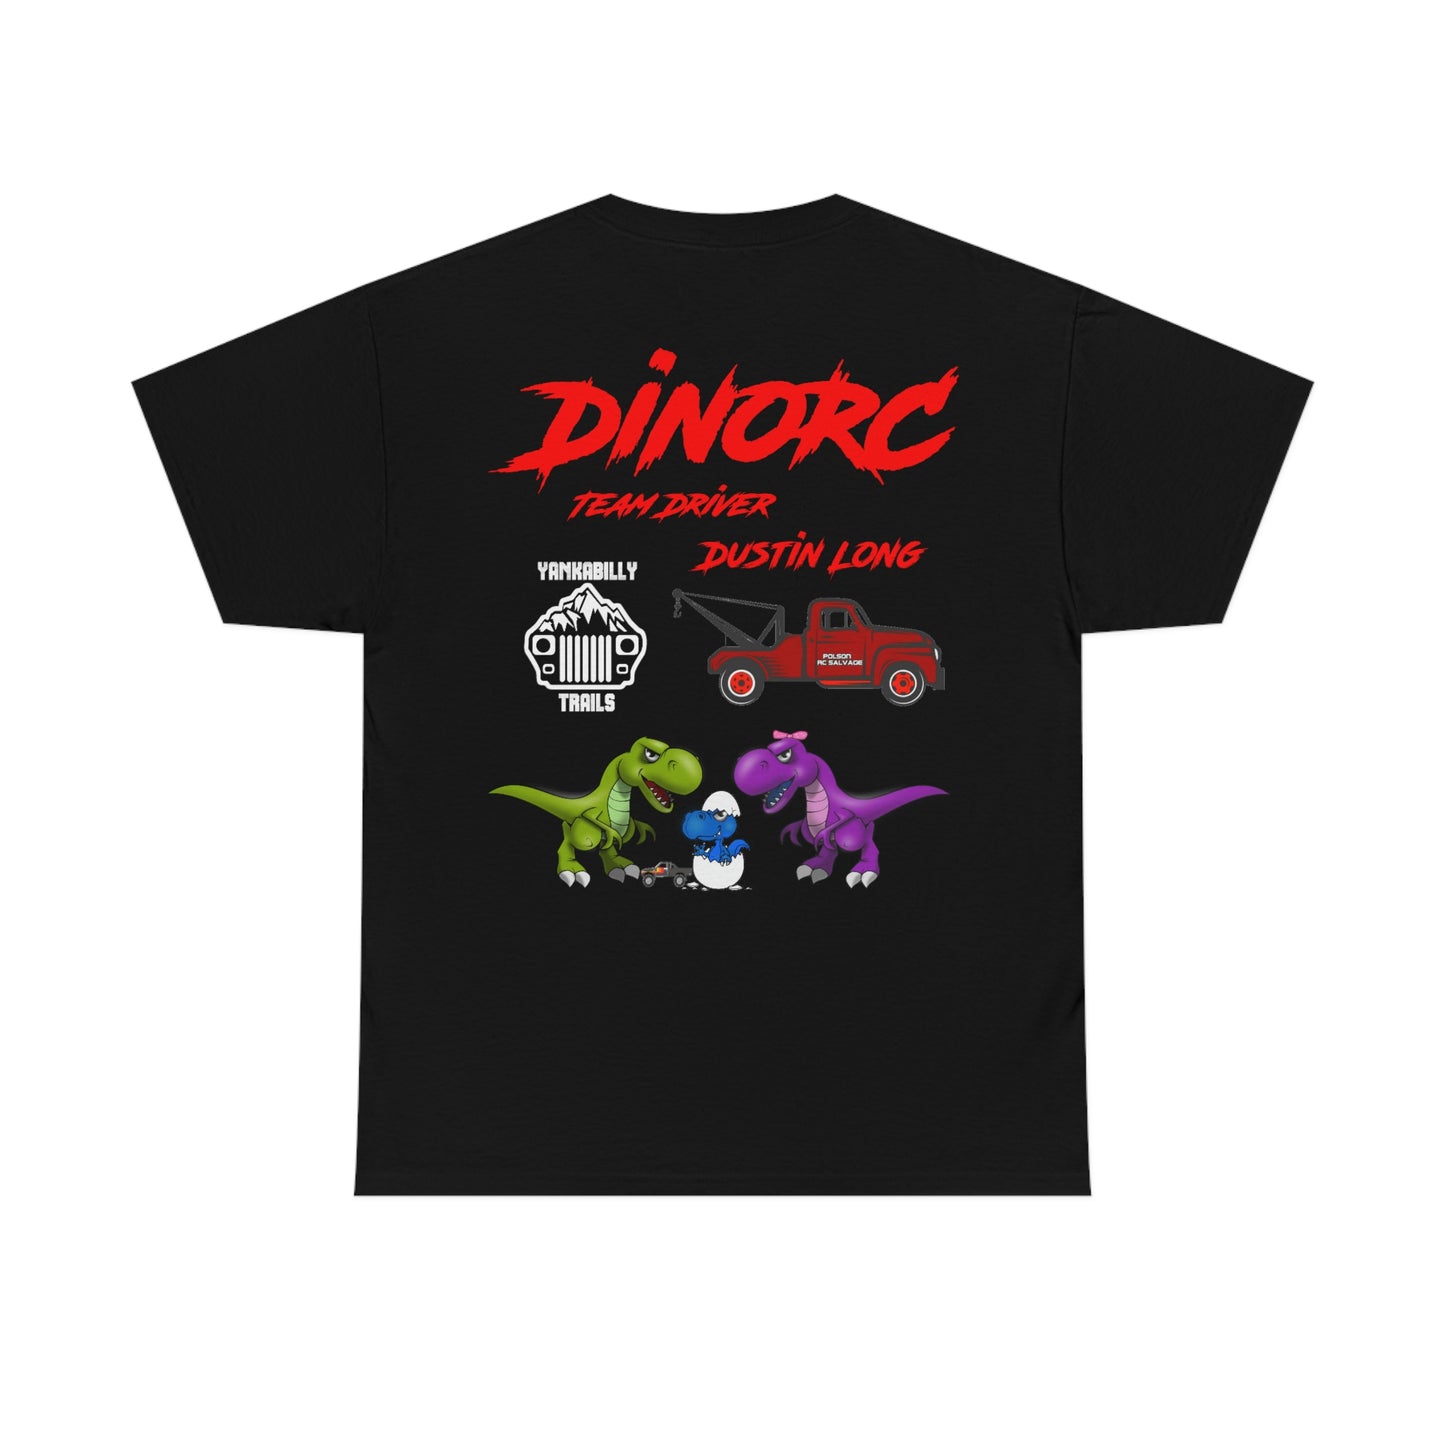 Team Driver Dustin Long  logo Front and Back DinoRc Logo T-Shirt S-5x 5 colors